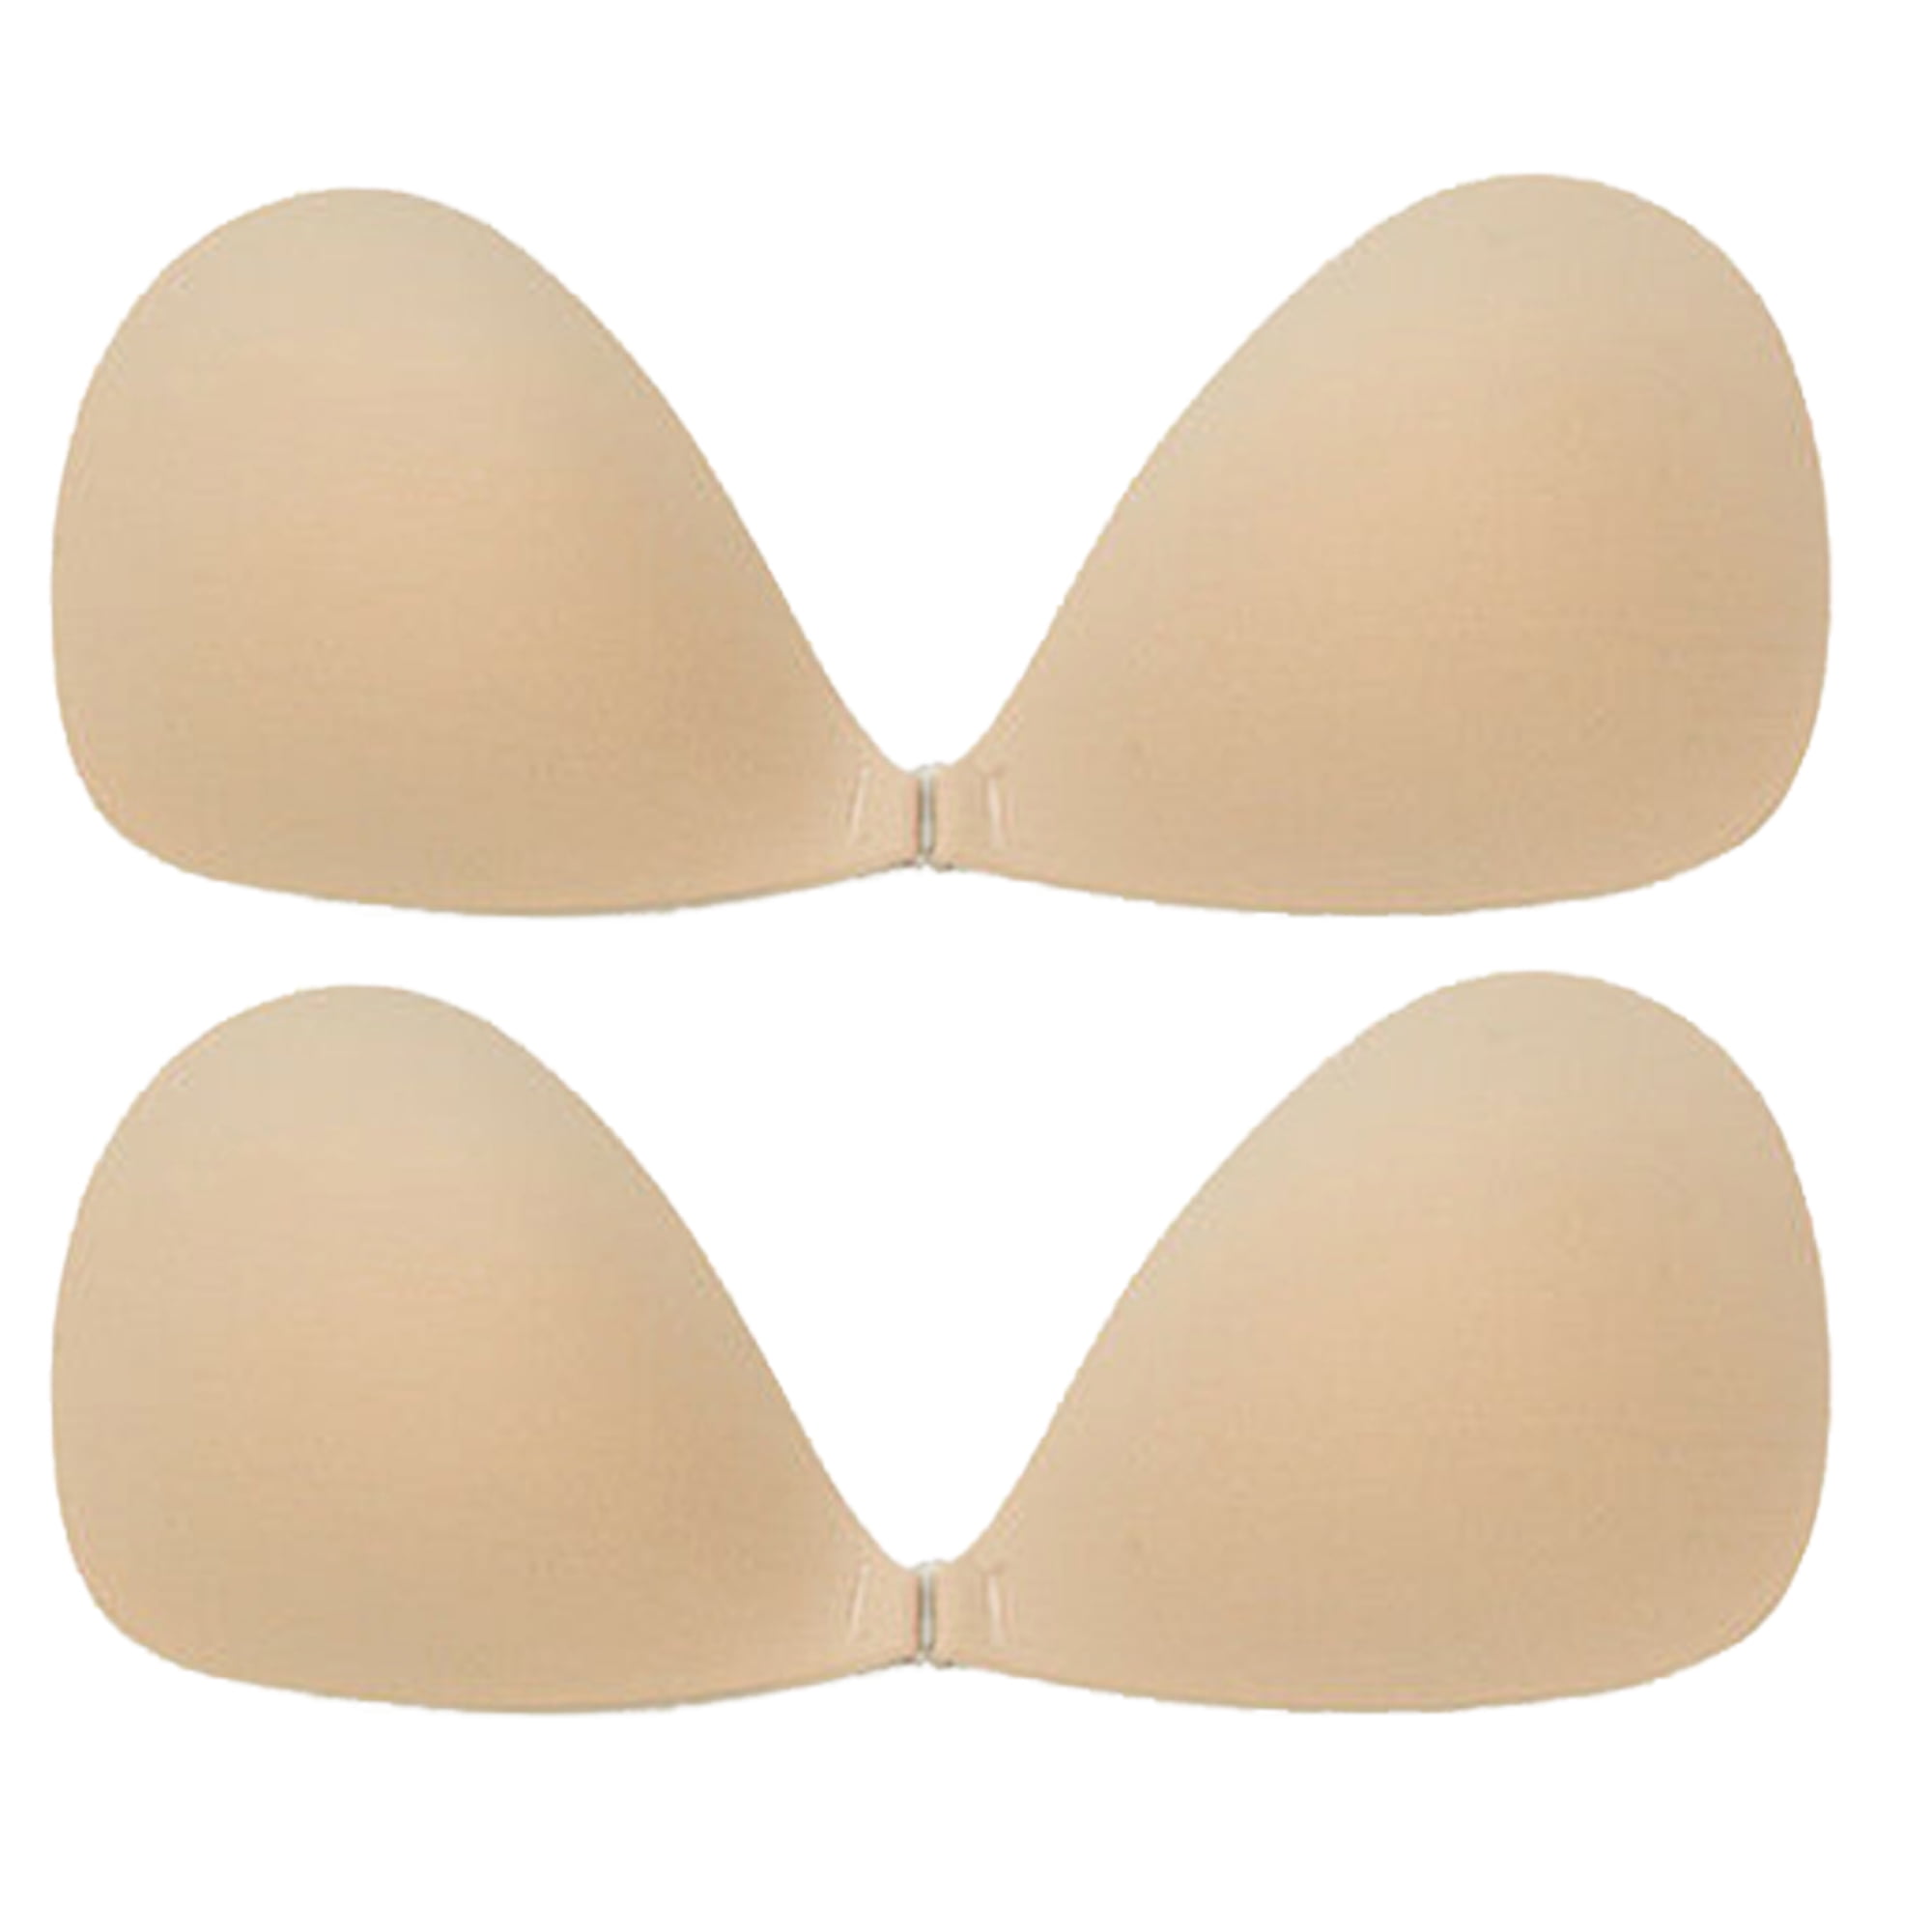 Dicasser 3Pairs Sticky Bra, Breathable Strapless Bra Adhesive Push Up  Backless Bras for Women 